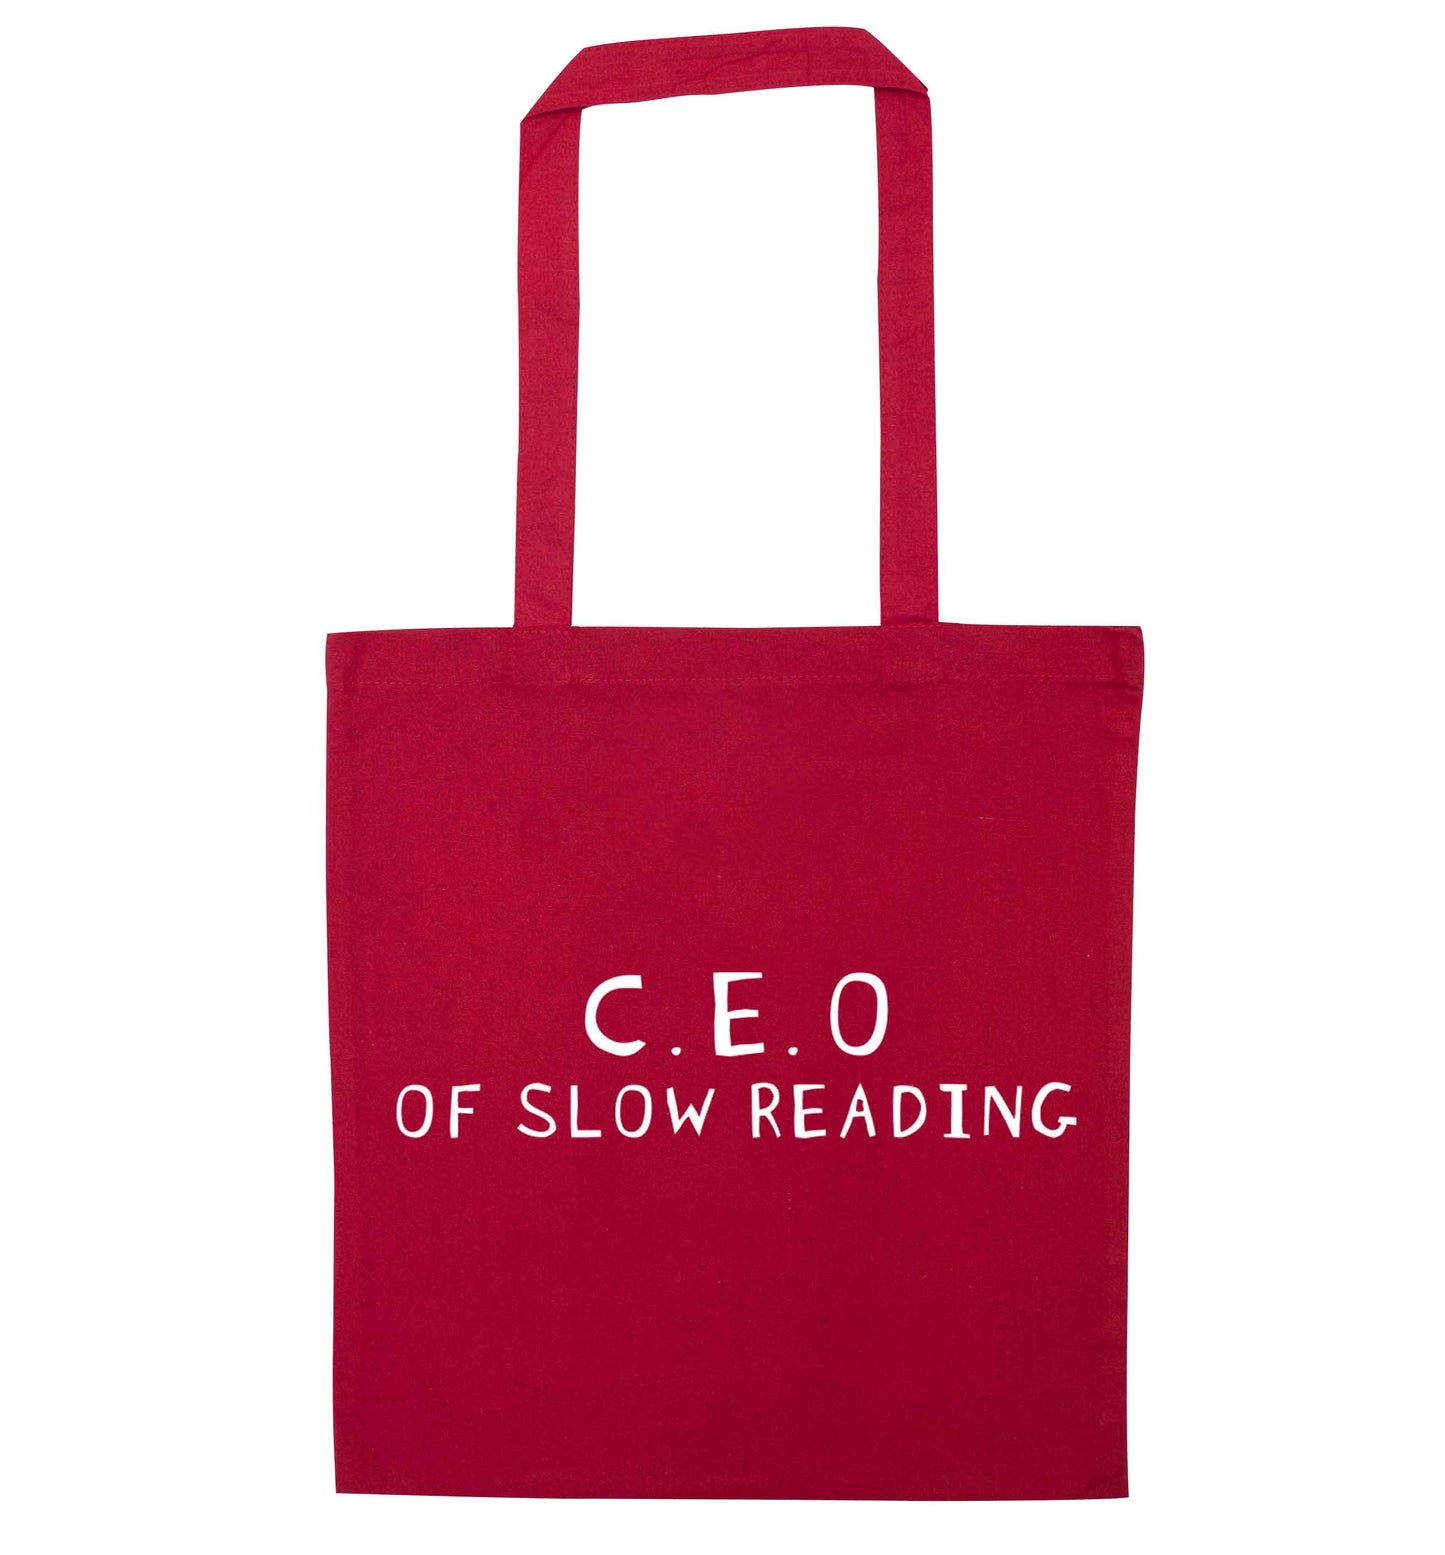 We love this for YOU! Who else loves saying this?!  red tote bag